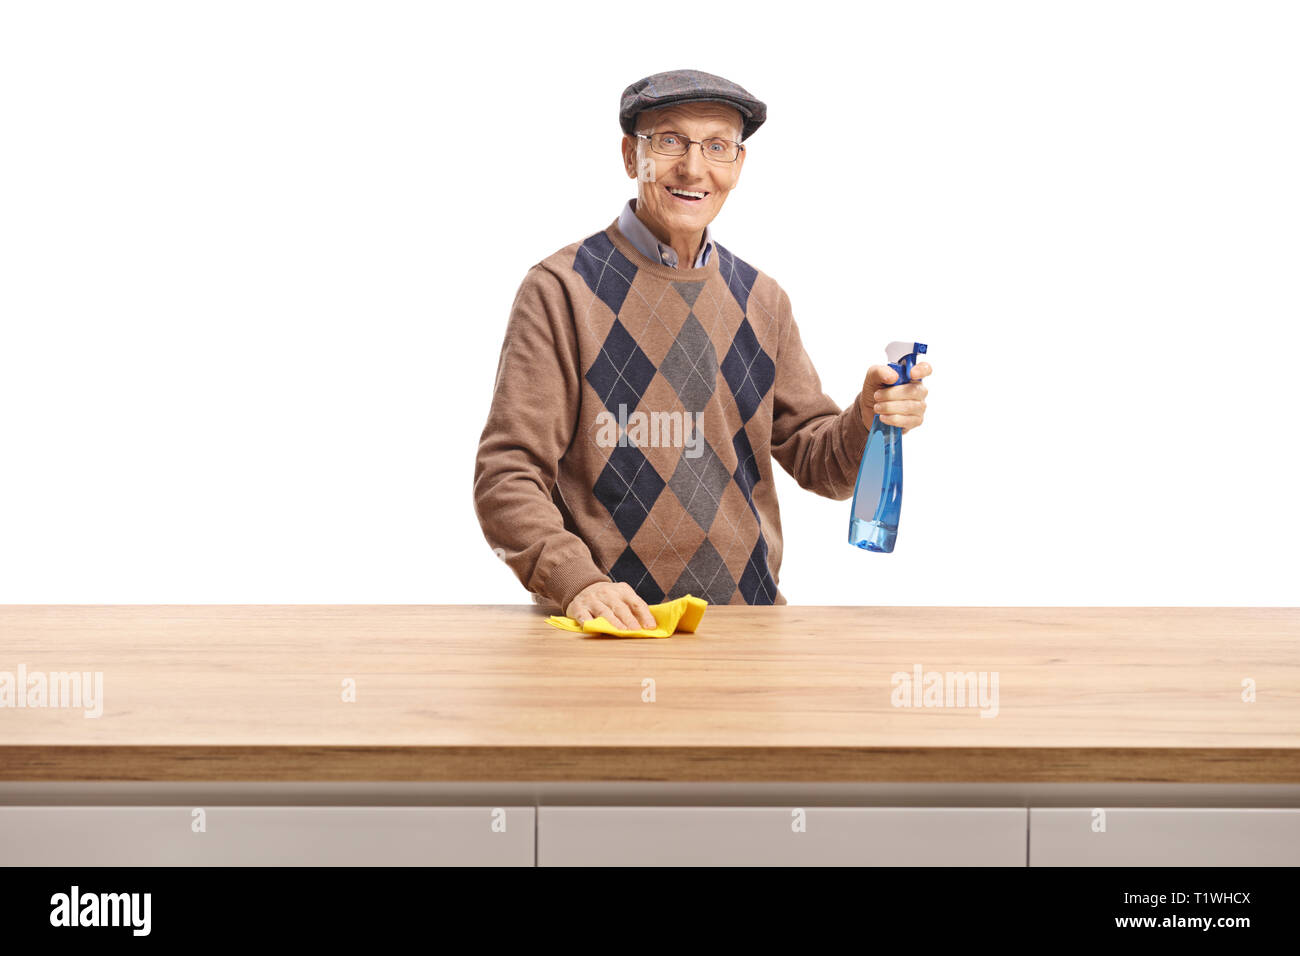 Elderly man with a cloth and cleaning spray standing behind a wooden counter and smiling at the camera isolated on white background Stock Photo